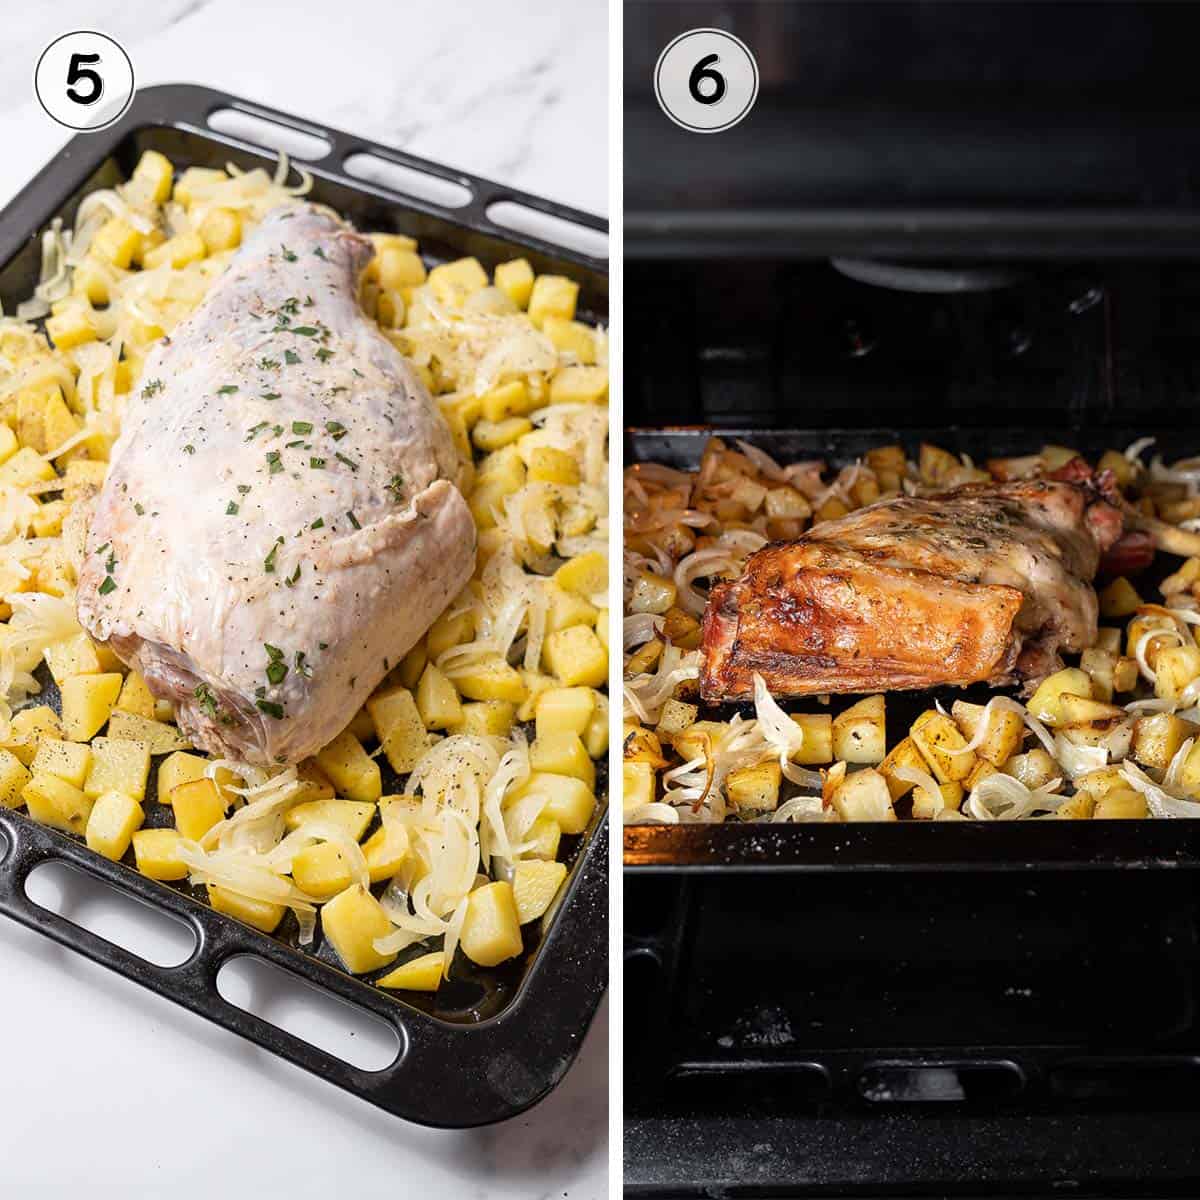 placing the roast in a pan and baking it in the oven.